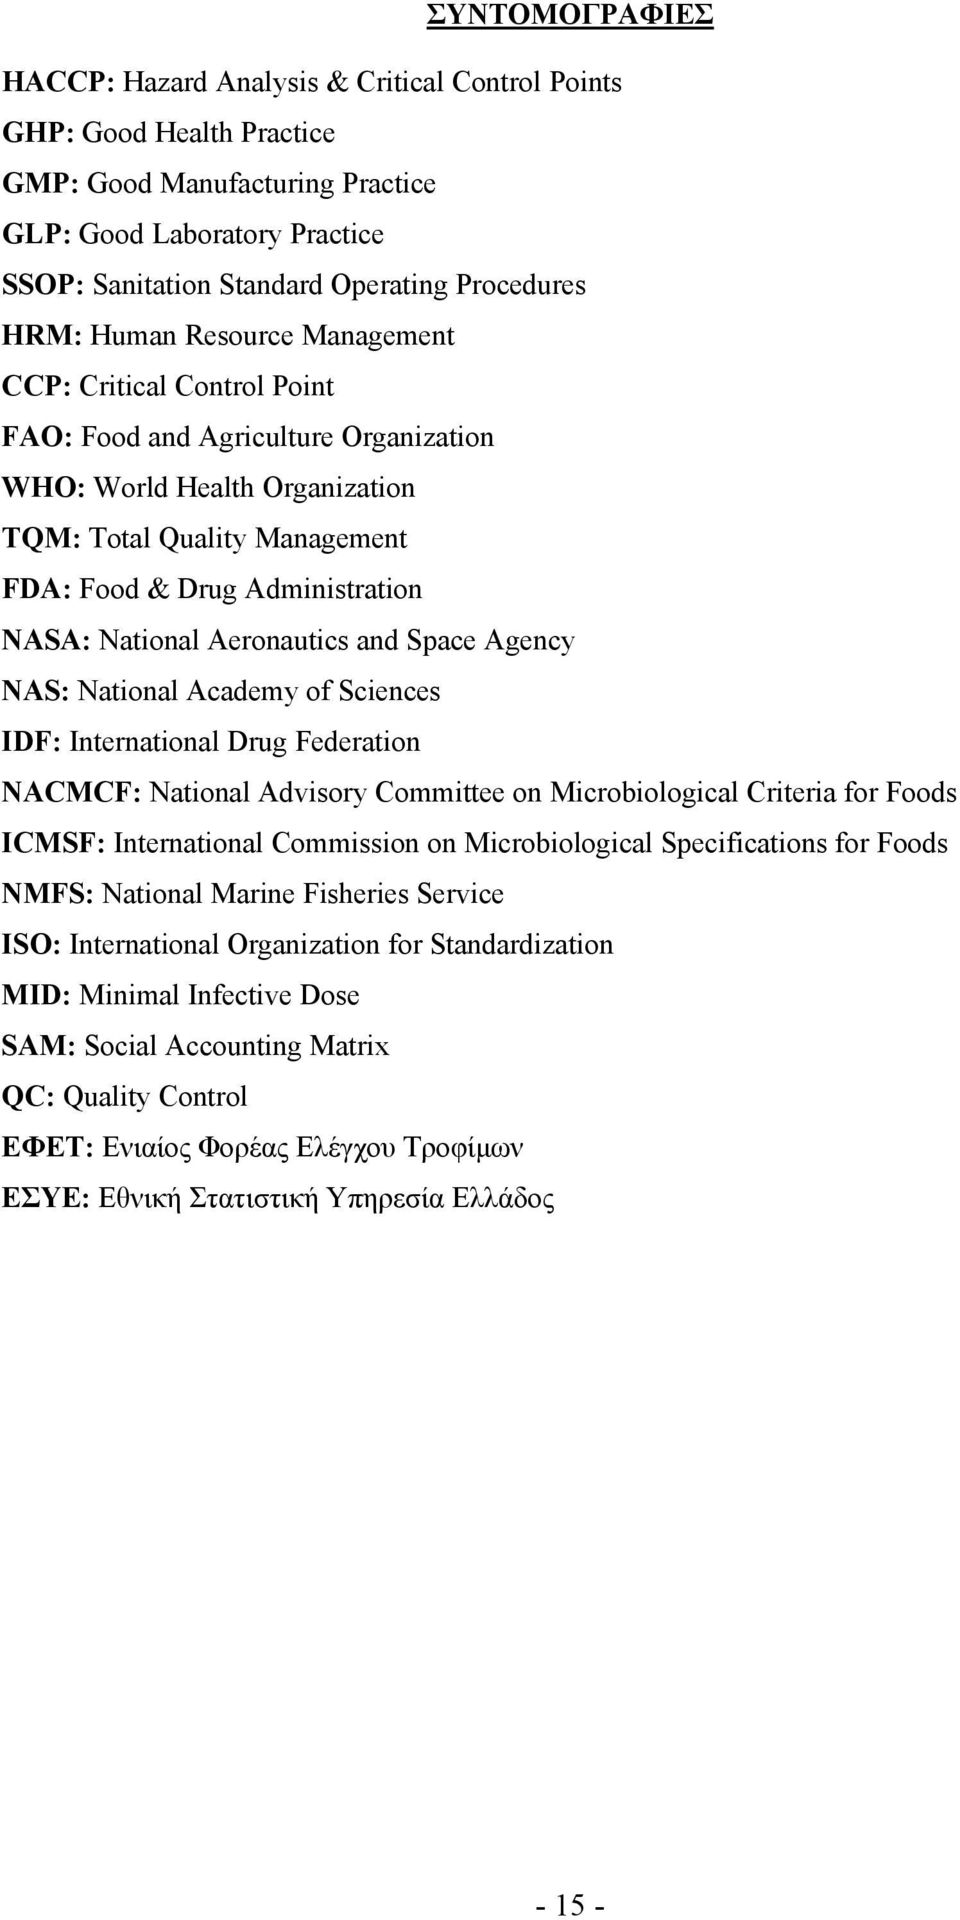 National Aeronautics and Space Agency NAS: National Academy of Sciences IDF: International Drug Federation NACMCF: National Advisory Committee on Microbiological Criteria for Foods ICMSF: